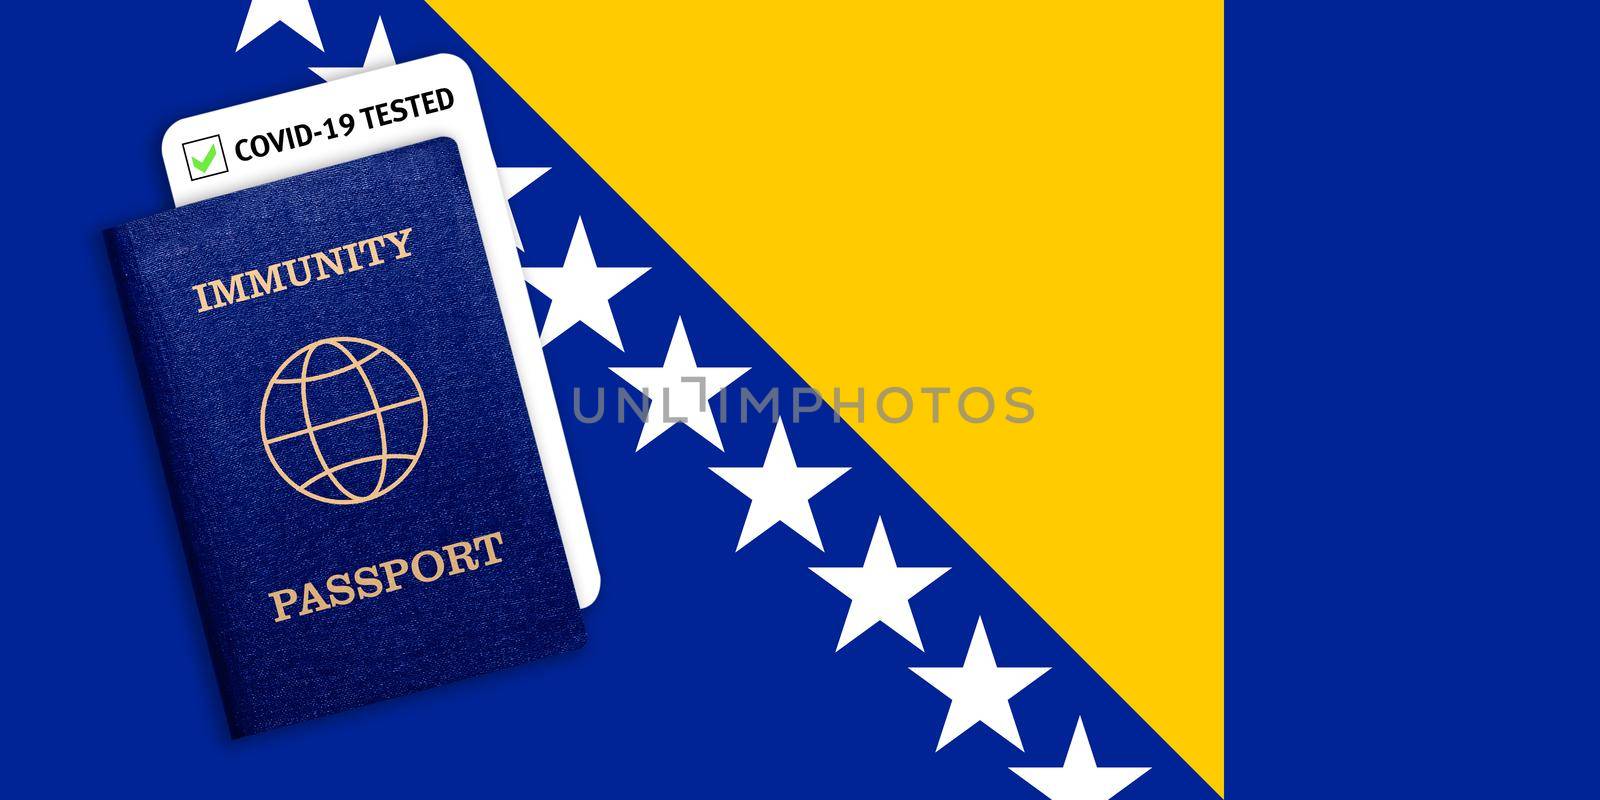 Concept of Immunity passport, certificate for traveling after pandemic for people who have had coronavirus or made vaccine and test result for COVID-19 on flag of Bosnia and Herzegovina